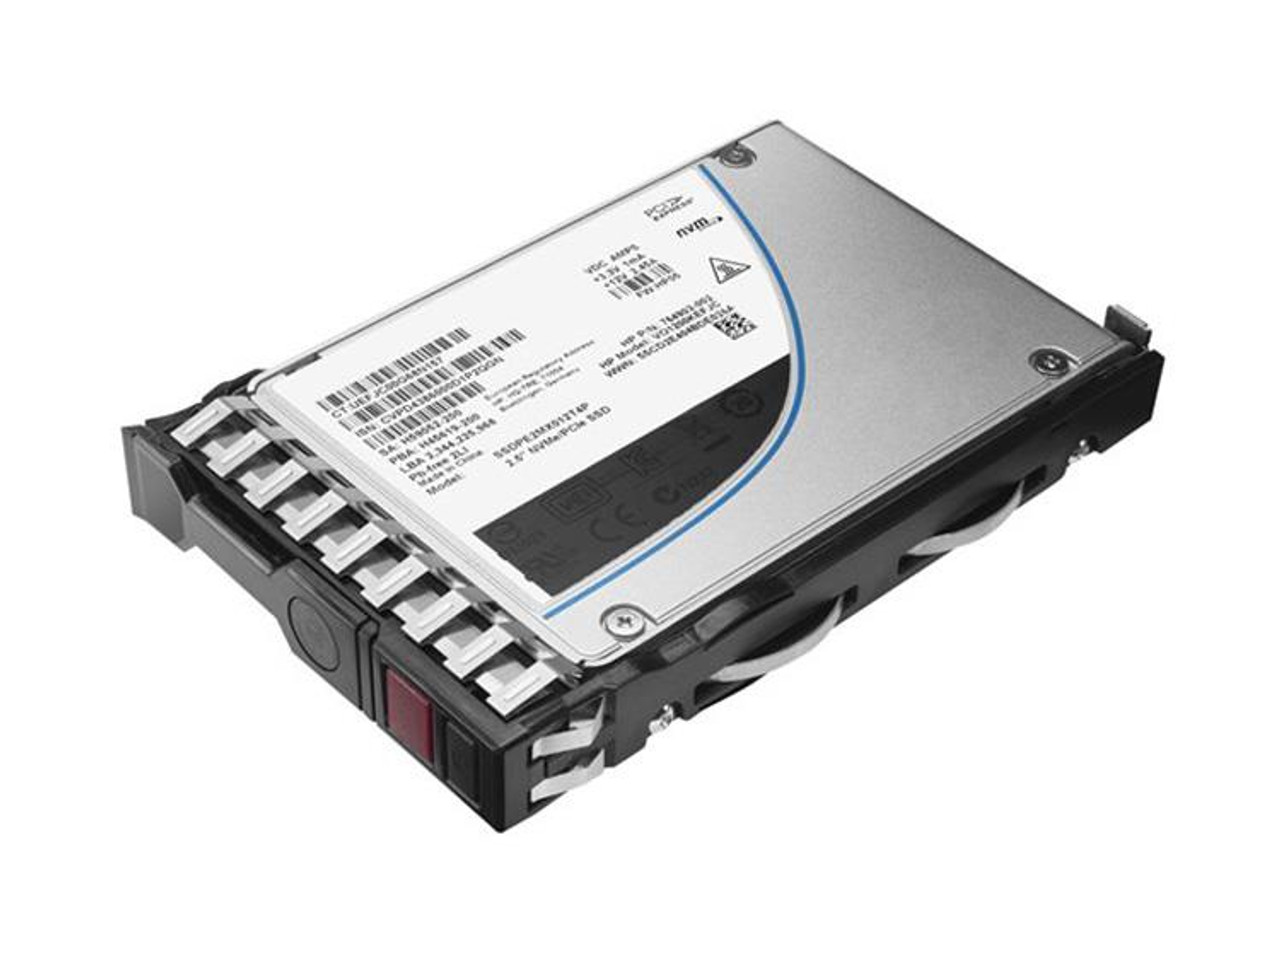 872376-B21 HPE 800GB eMLC SAS 12Gbps Hot Swap Mixed Use 2.5-inch Internal Solid State Drive (SSD) with Smart Carrier